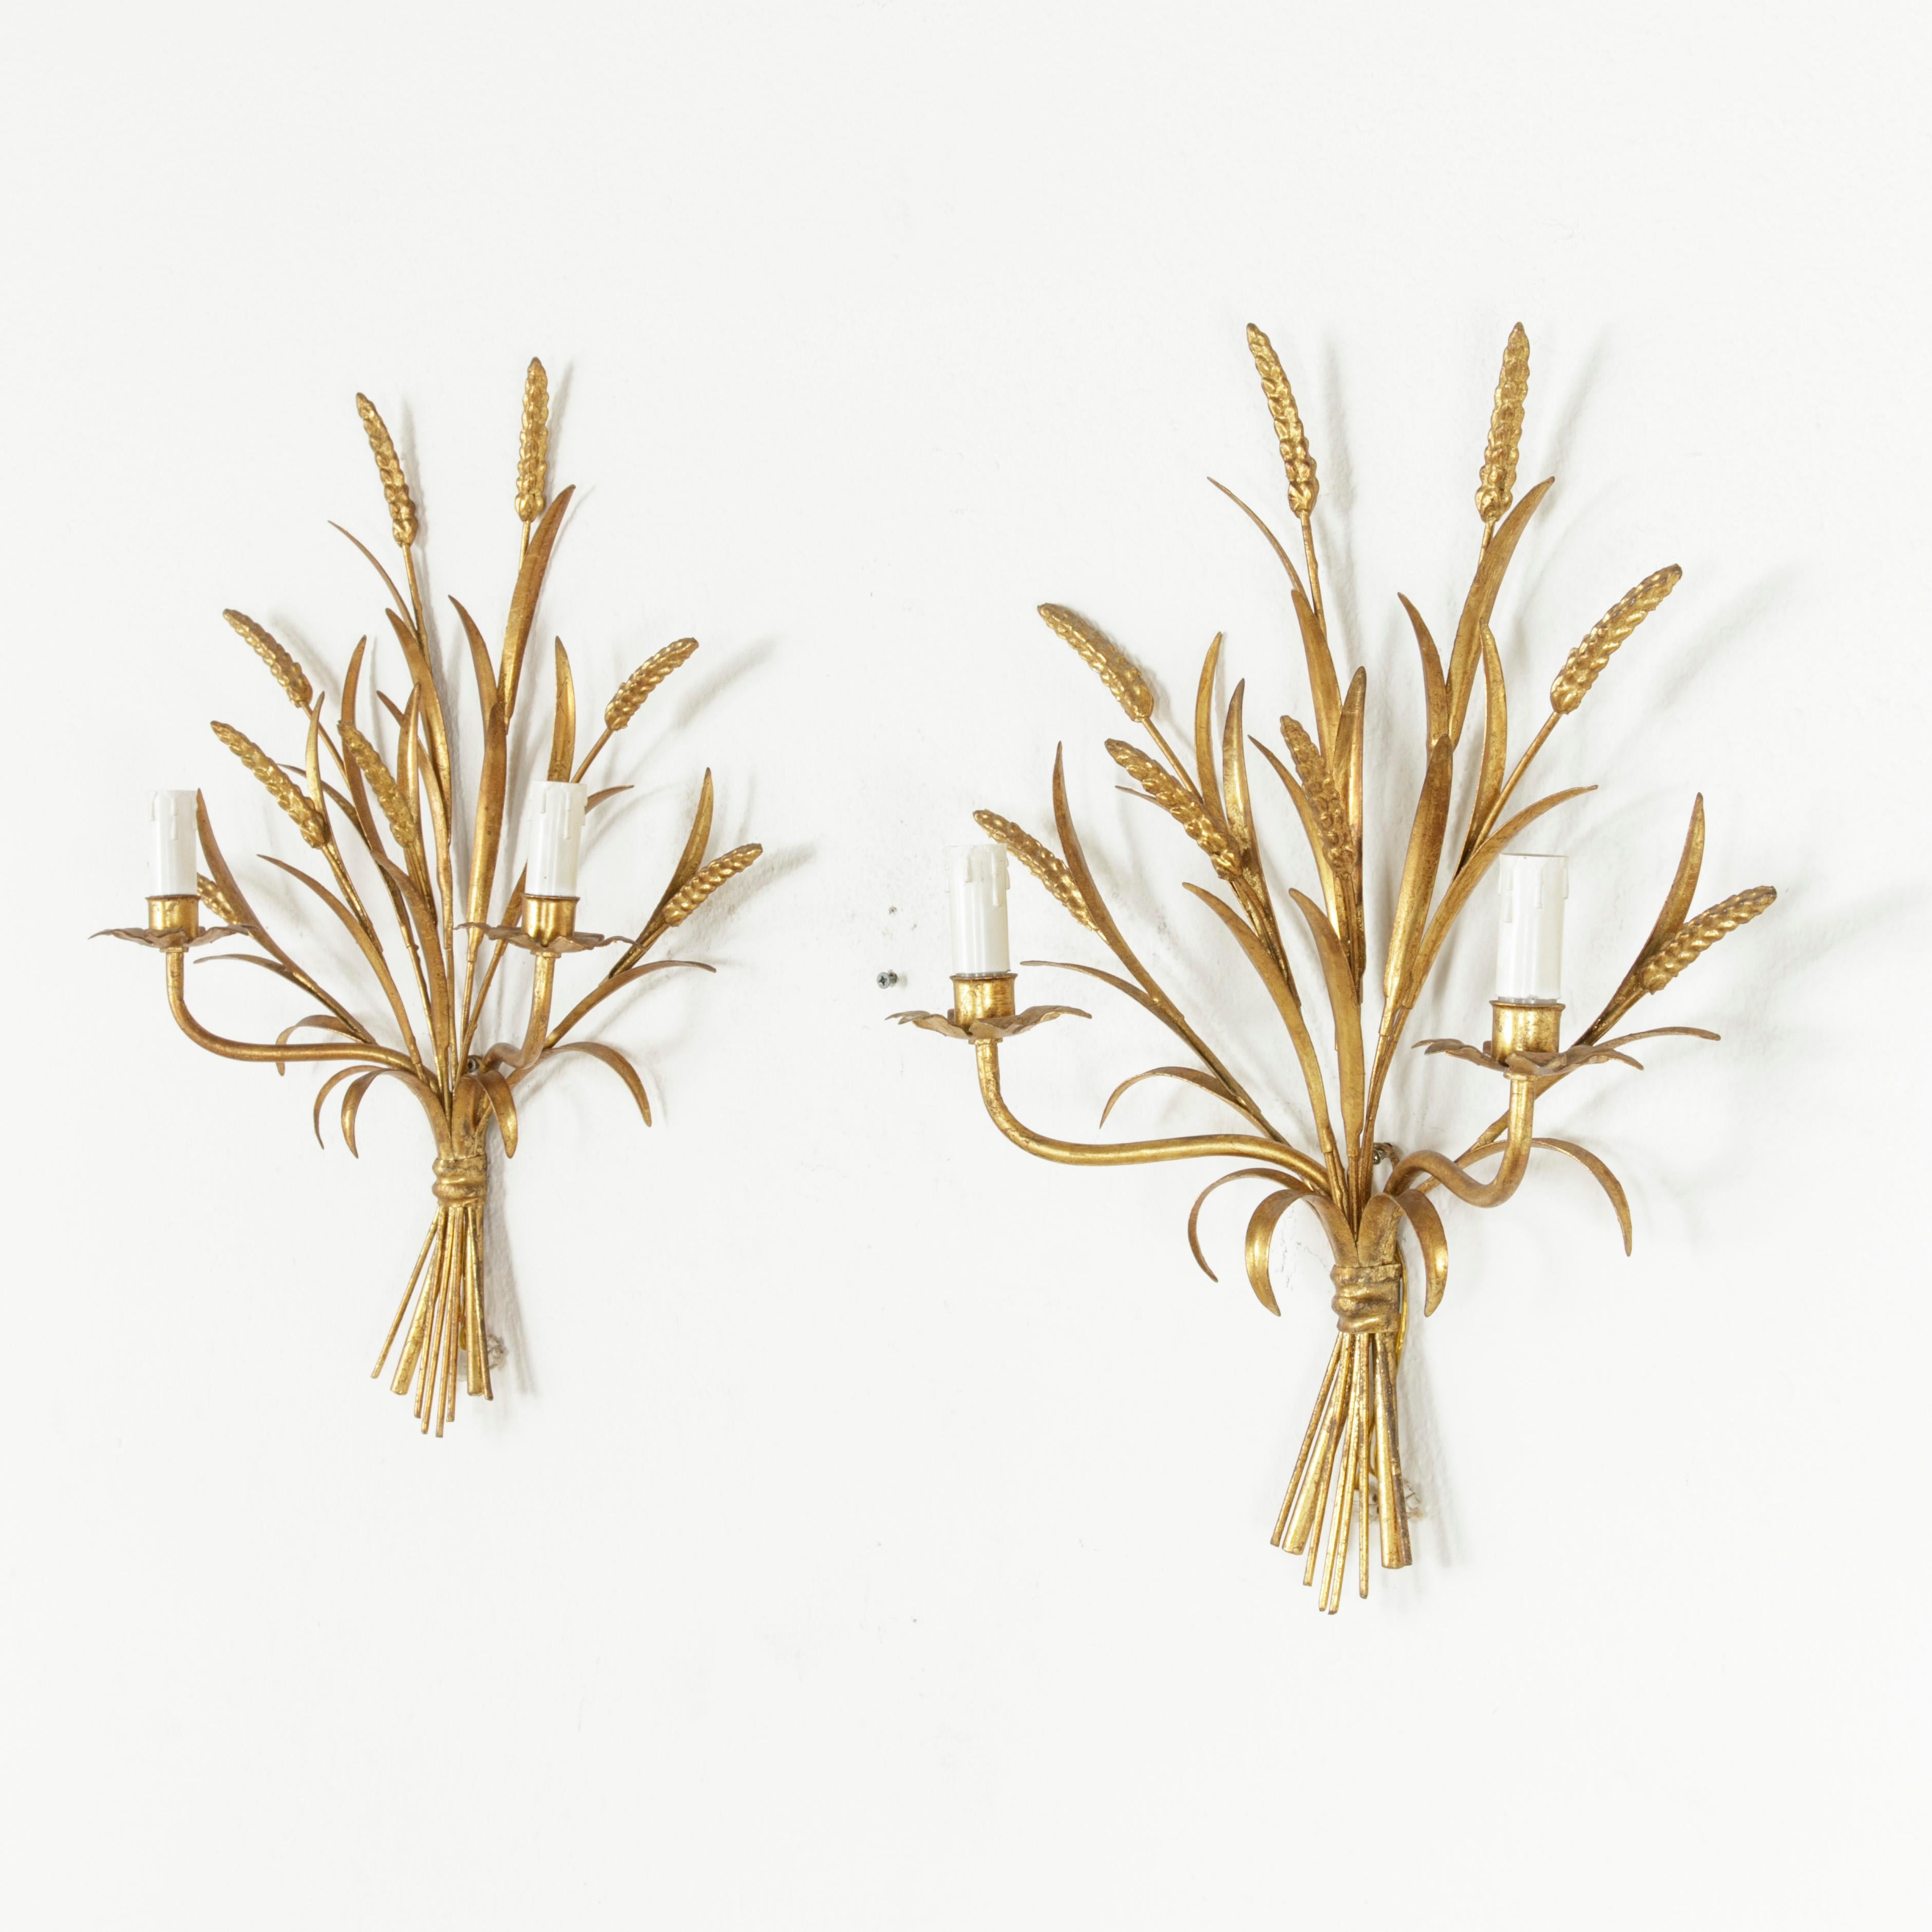 This pair of Italian gilt metal sconces is a midcentury Classic with its motif of bound sheaves of wheat. At 22 inches in height, this fine pair makes a grand impact when flanking a mirror. Reminiscent of Coco Chanel's Paris apartment. These circa